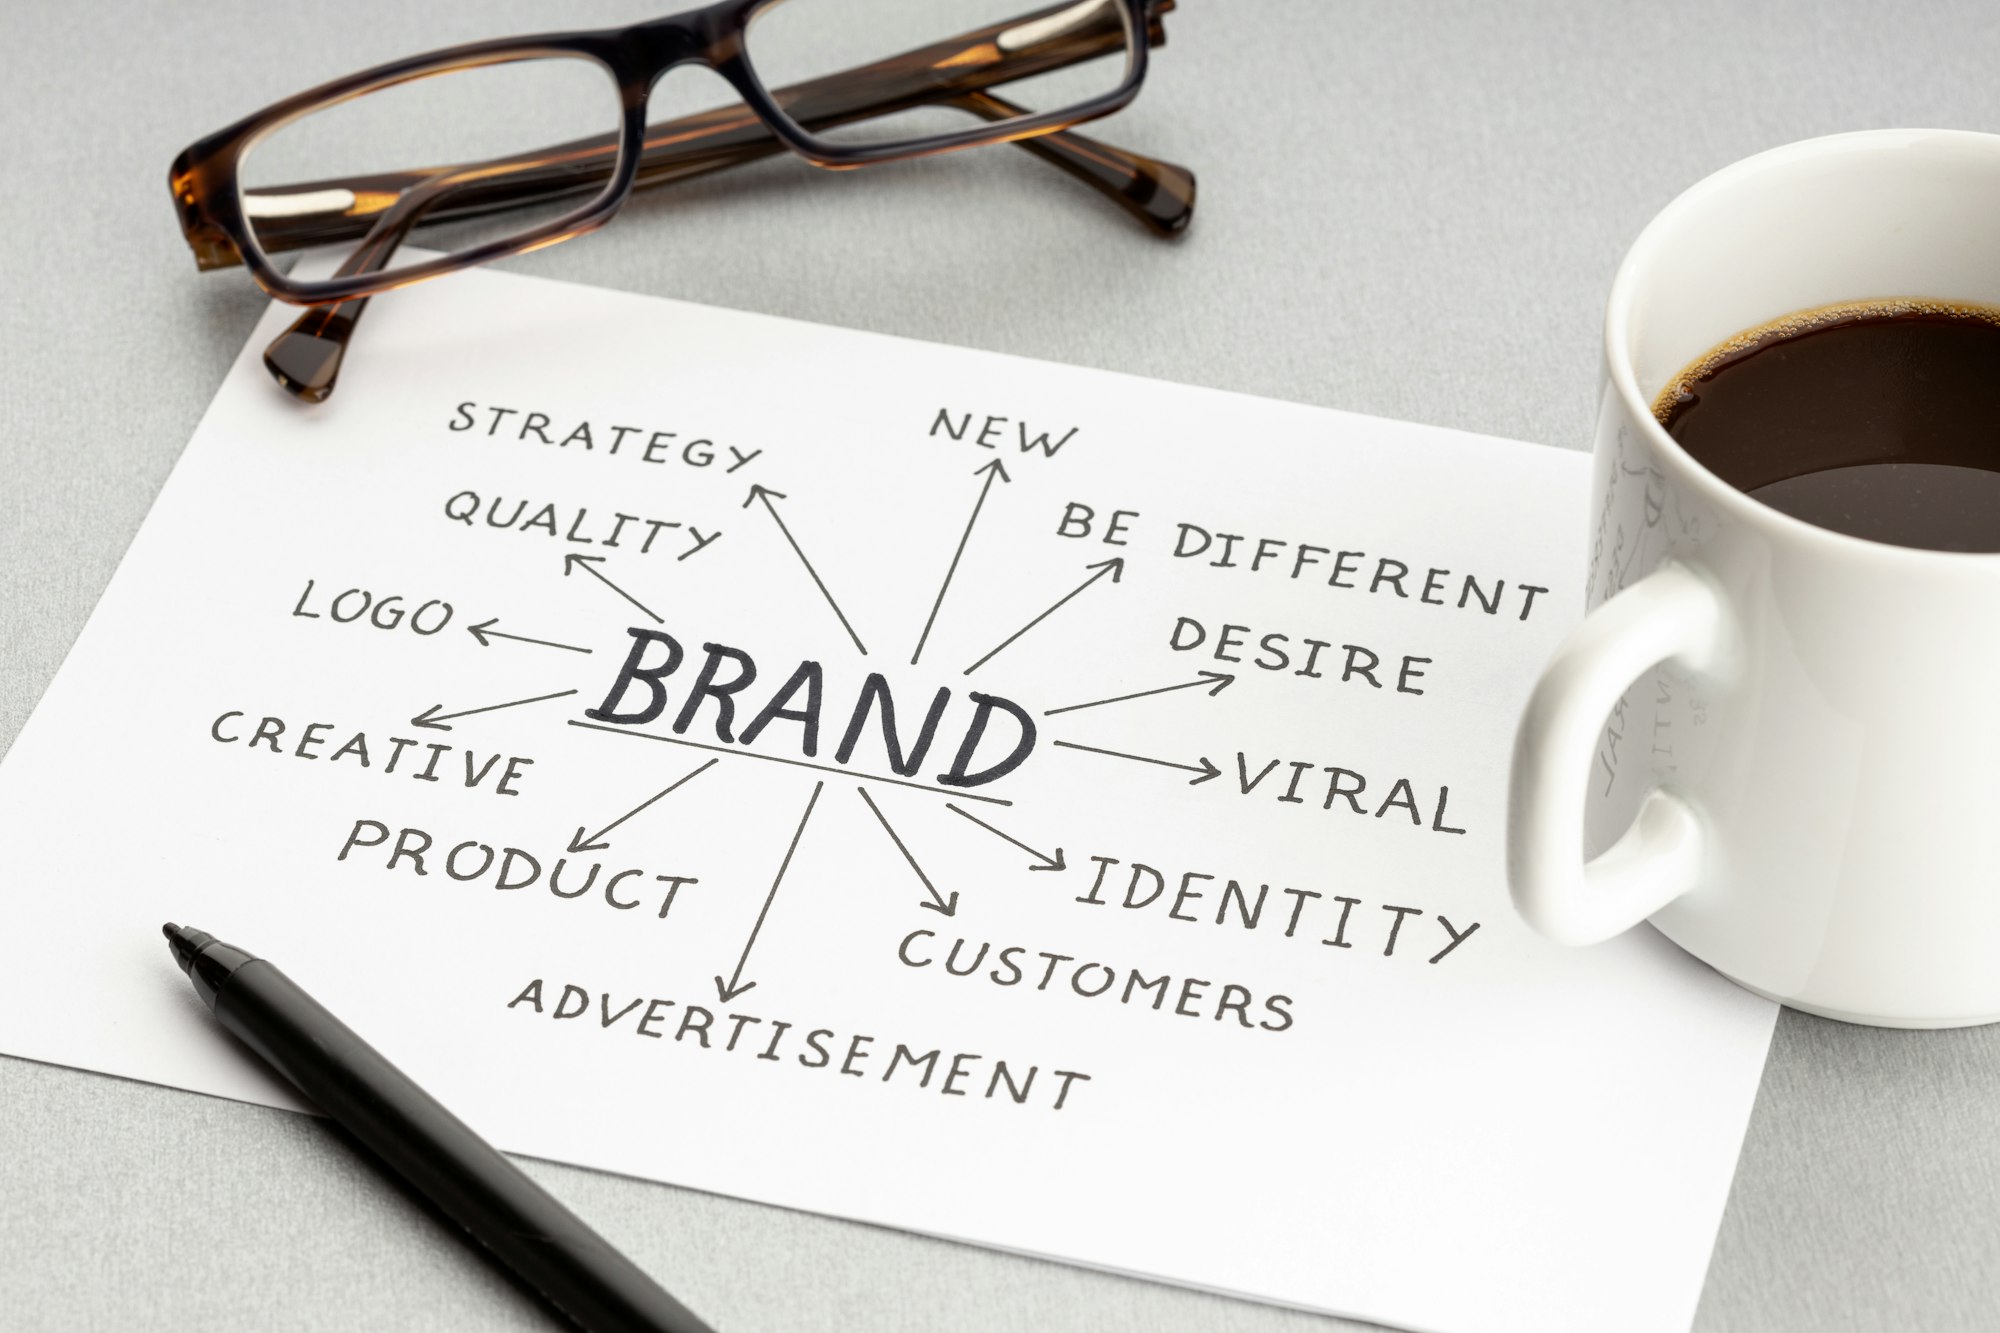 What is a Brand Development?